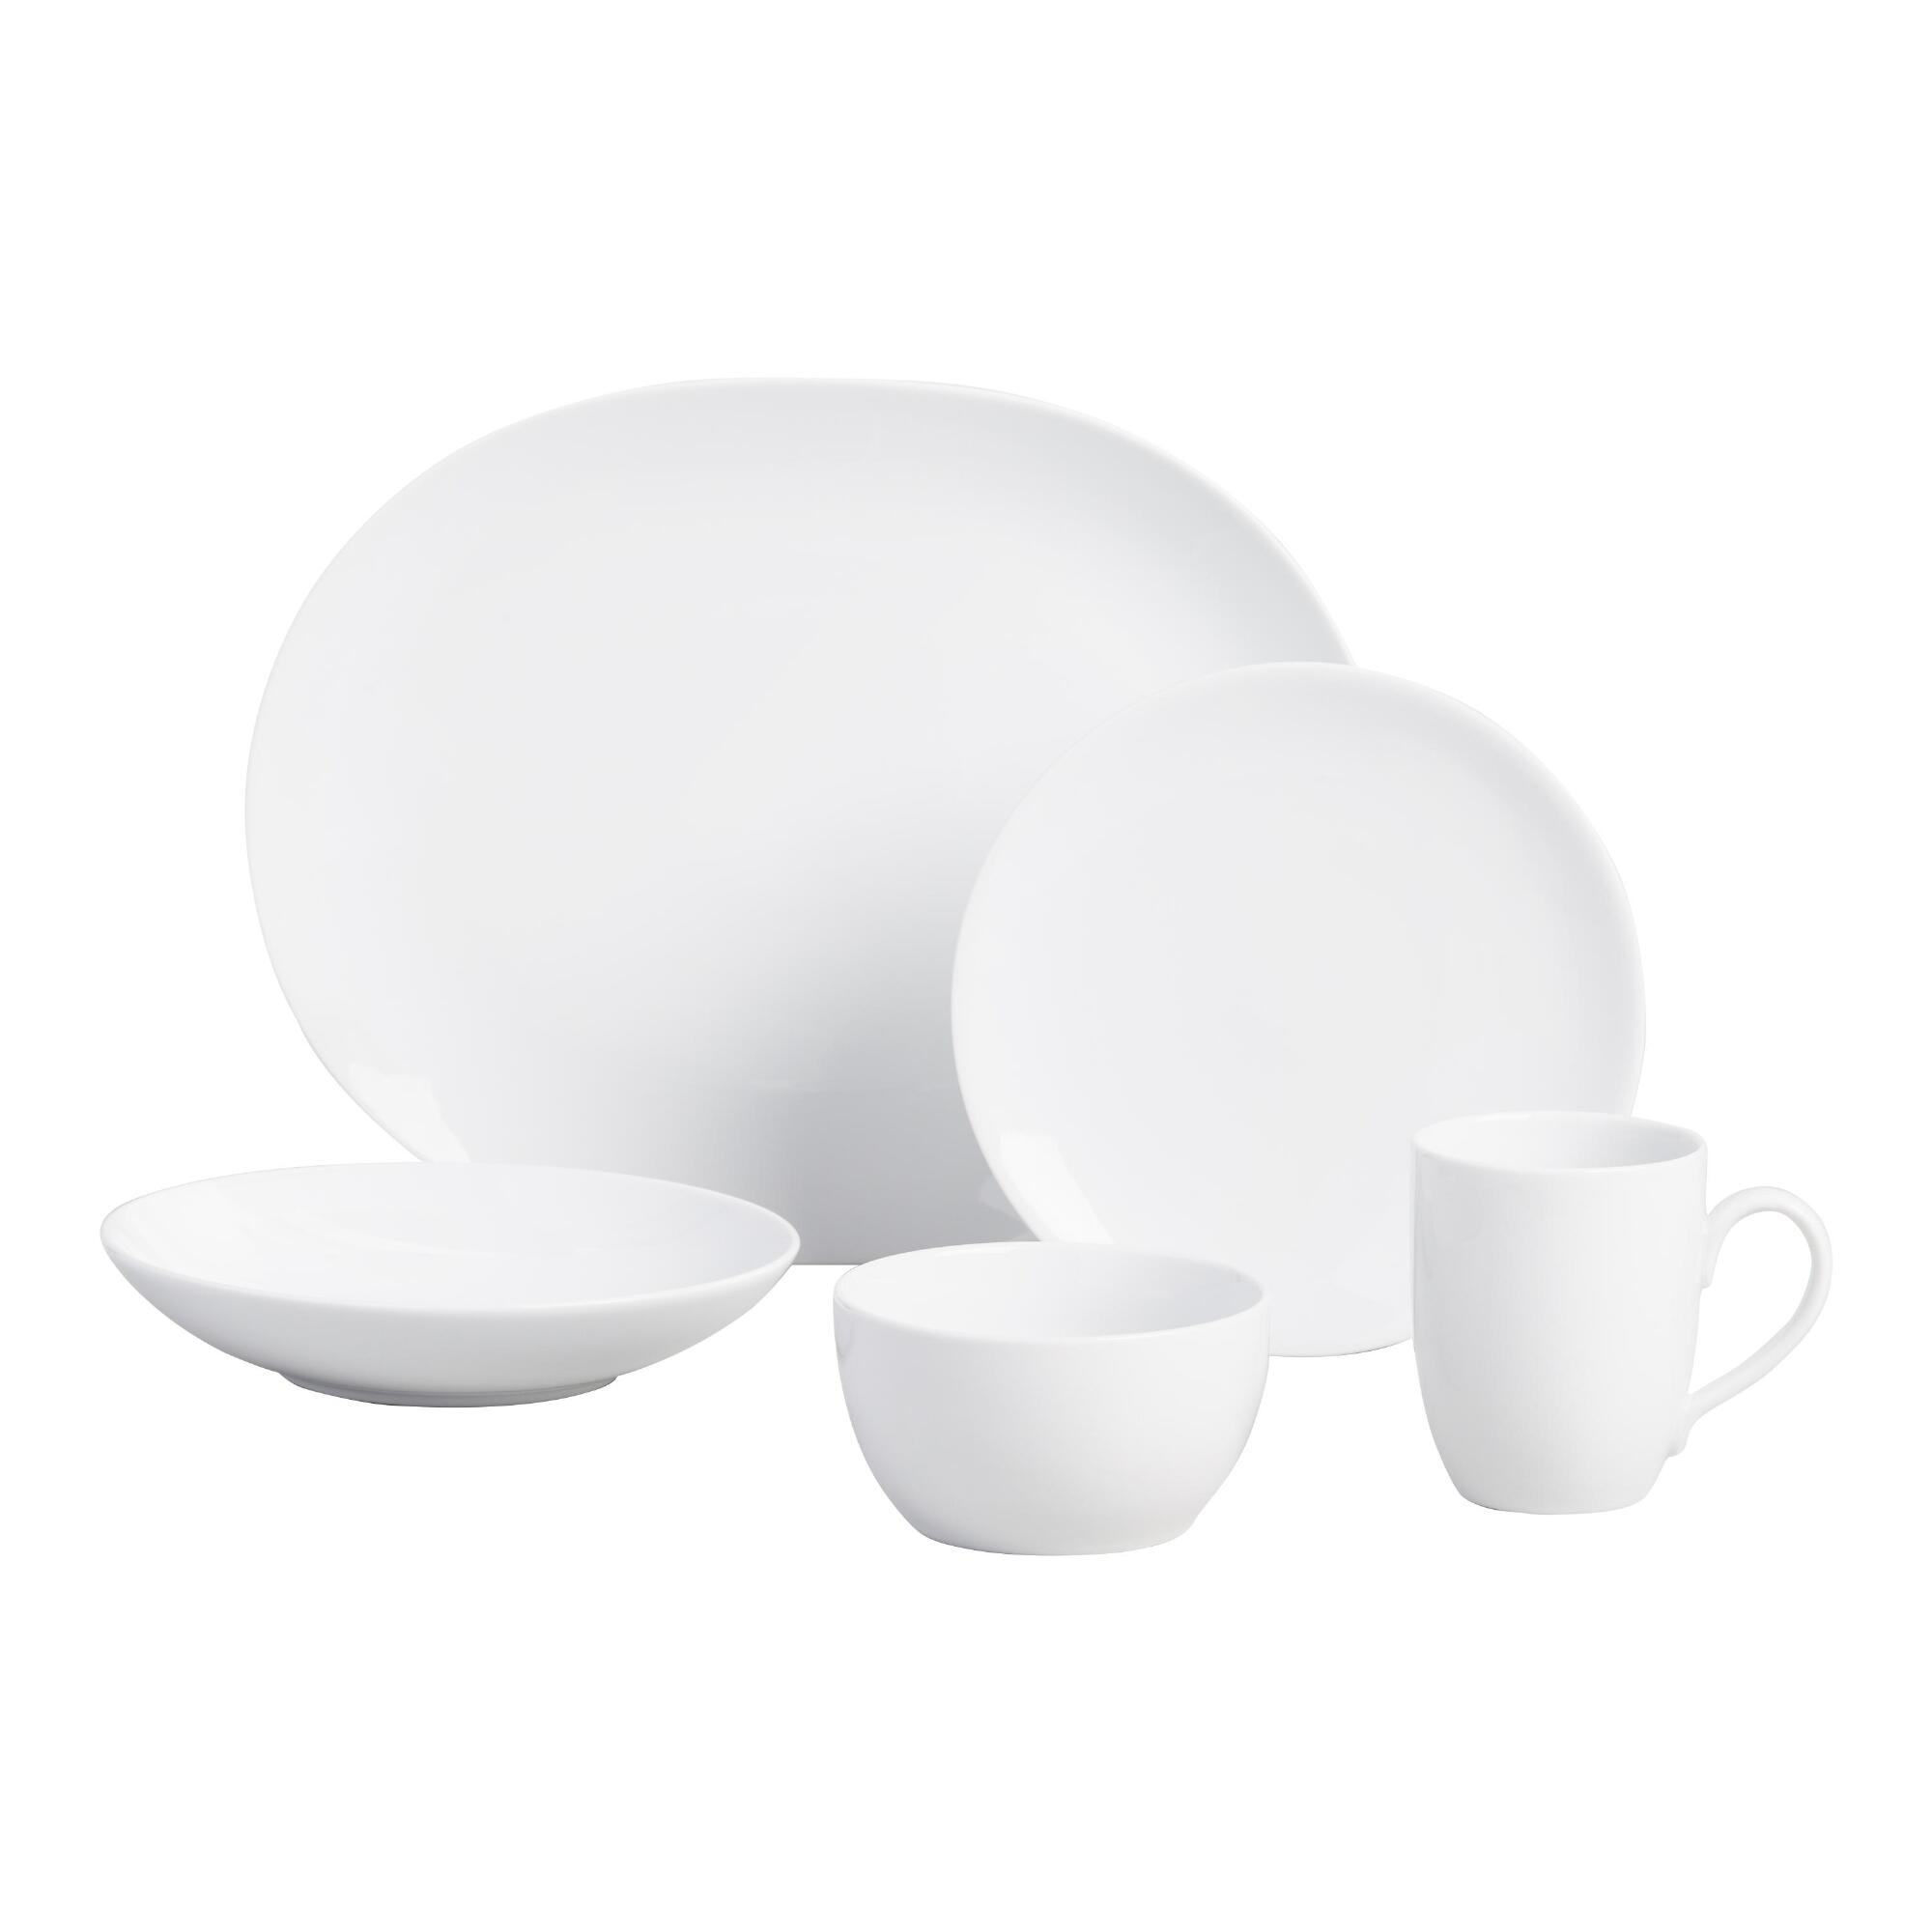 White Porcelain Coupe Dinnerware Collection by World Market